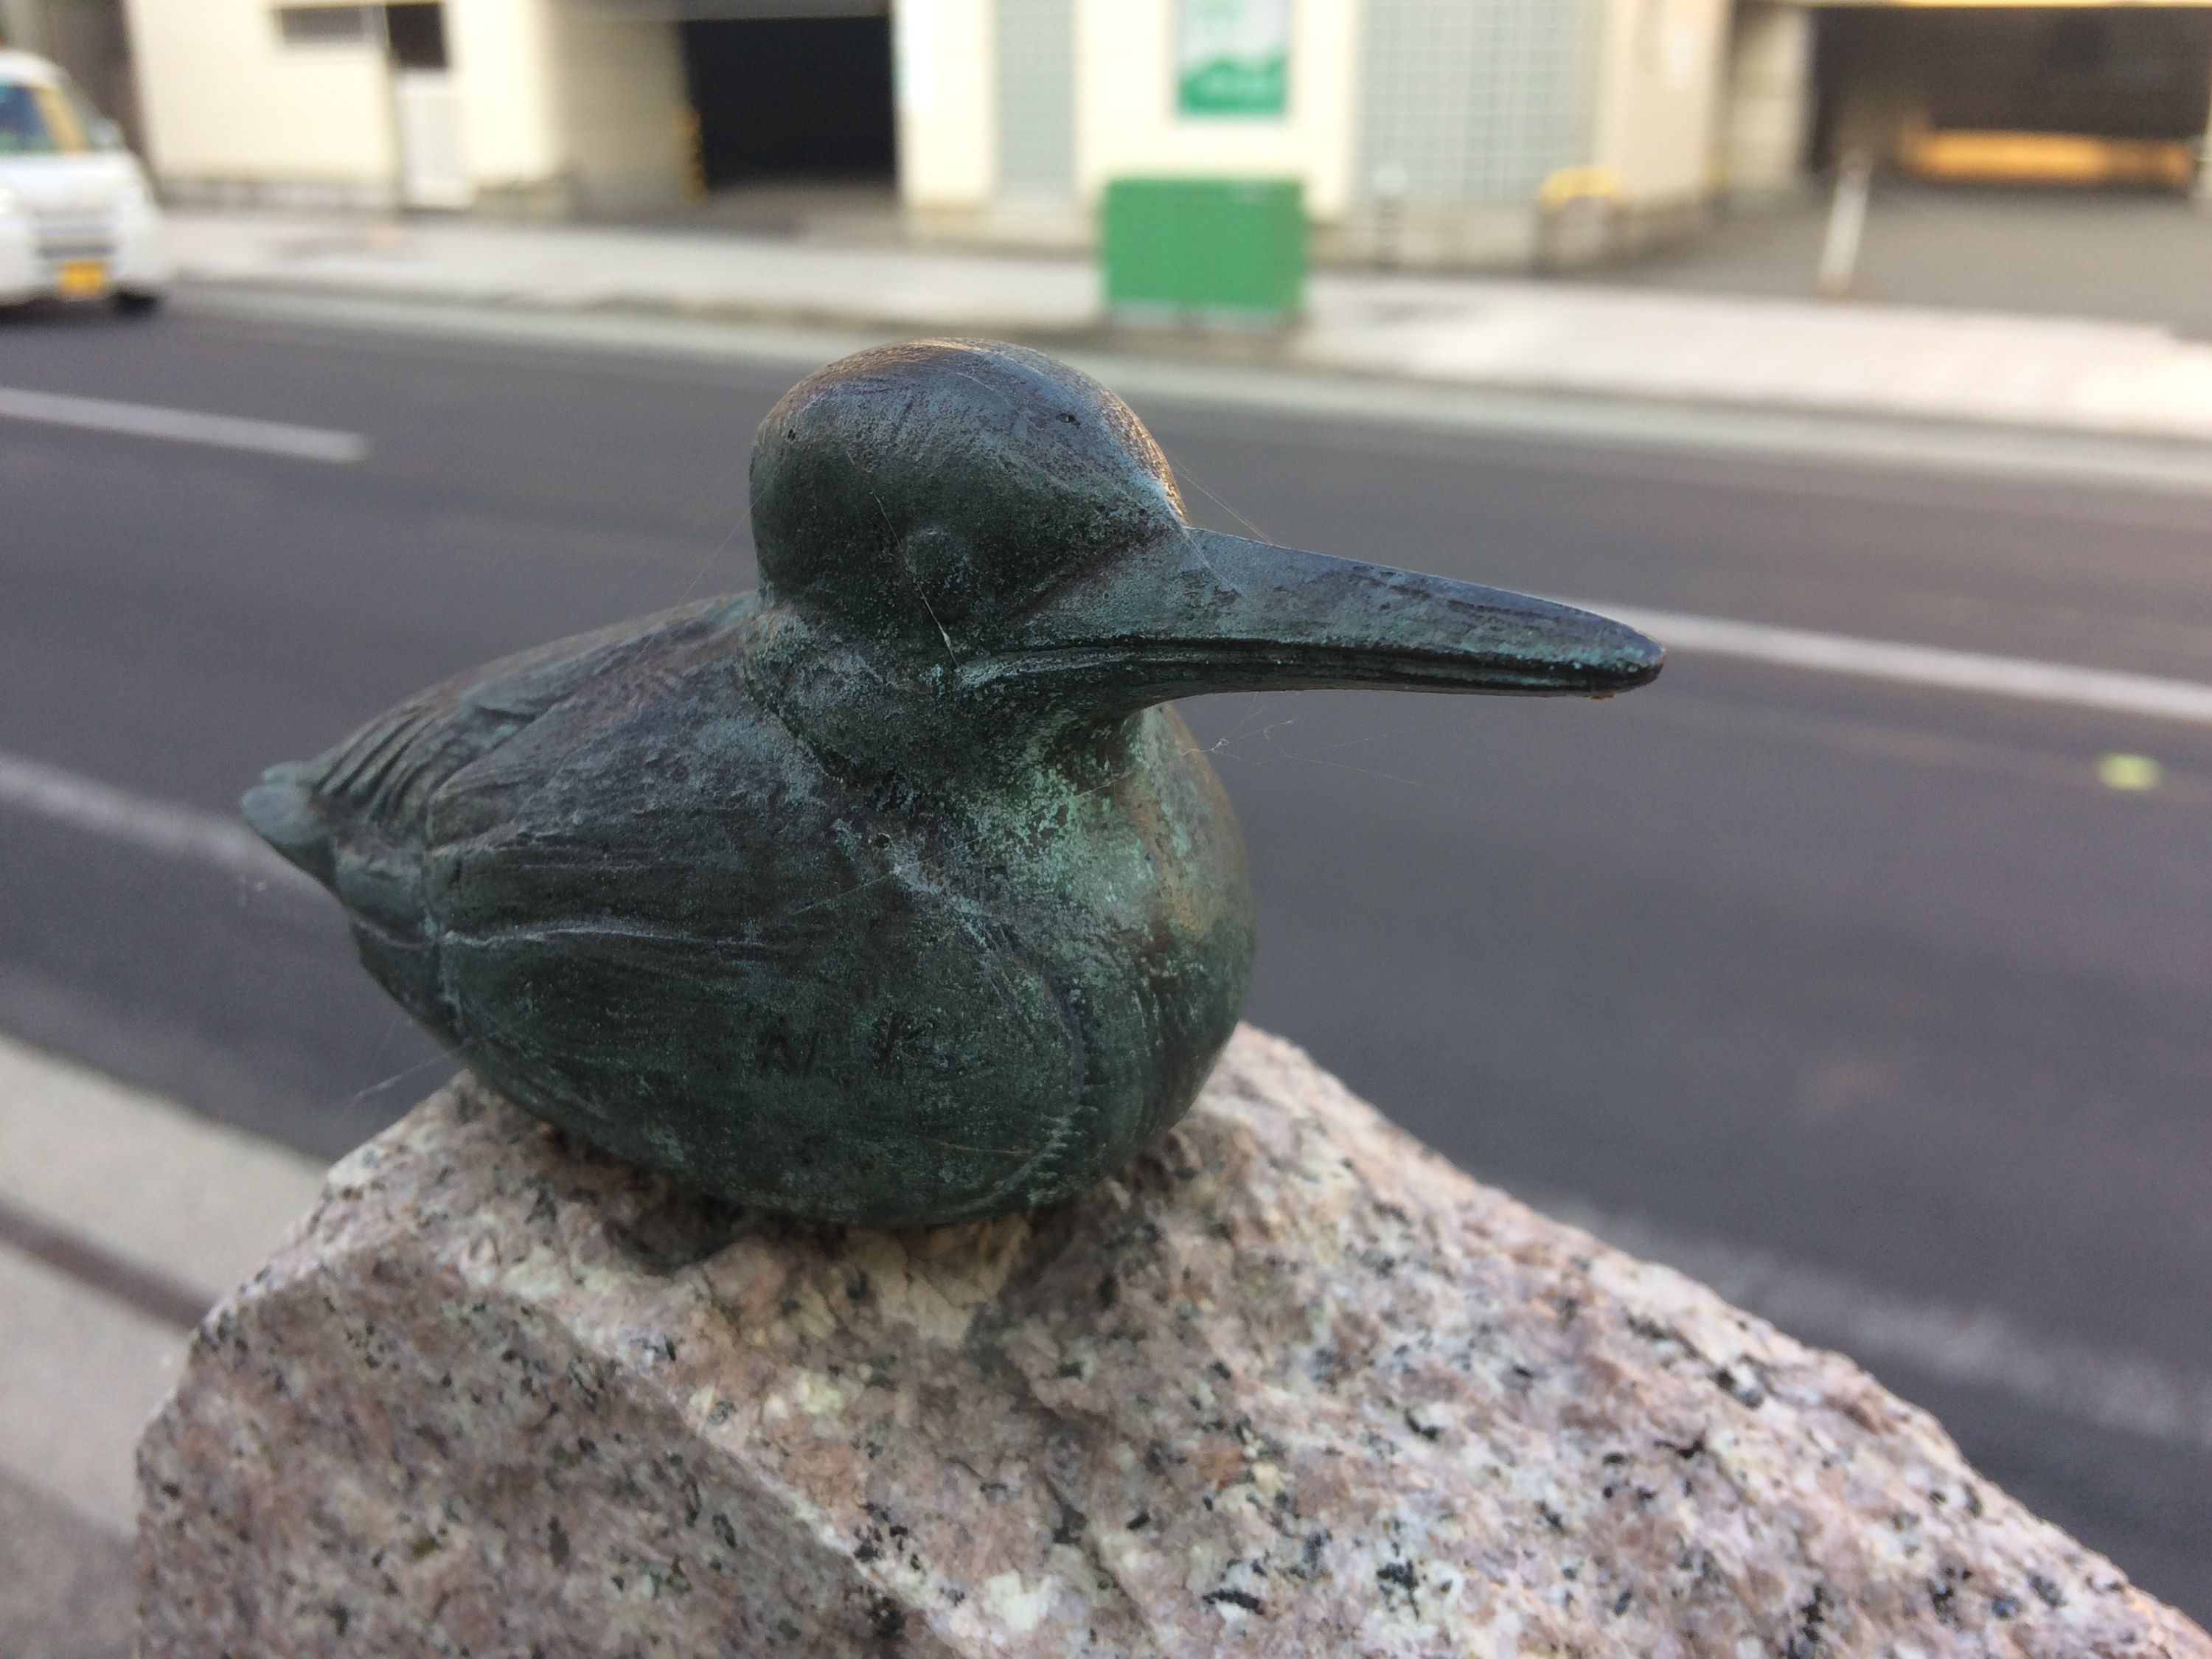 An unhappy statue of a kingfisher by the side of a road.